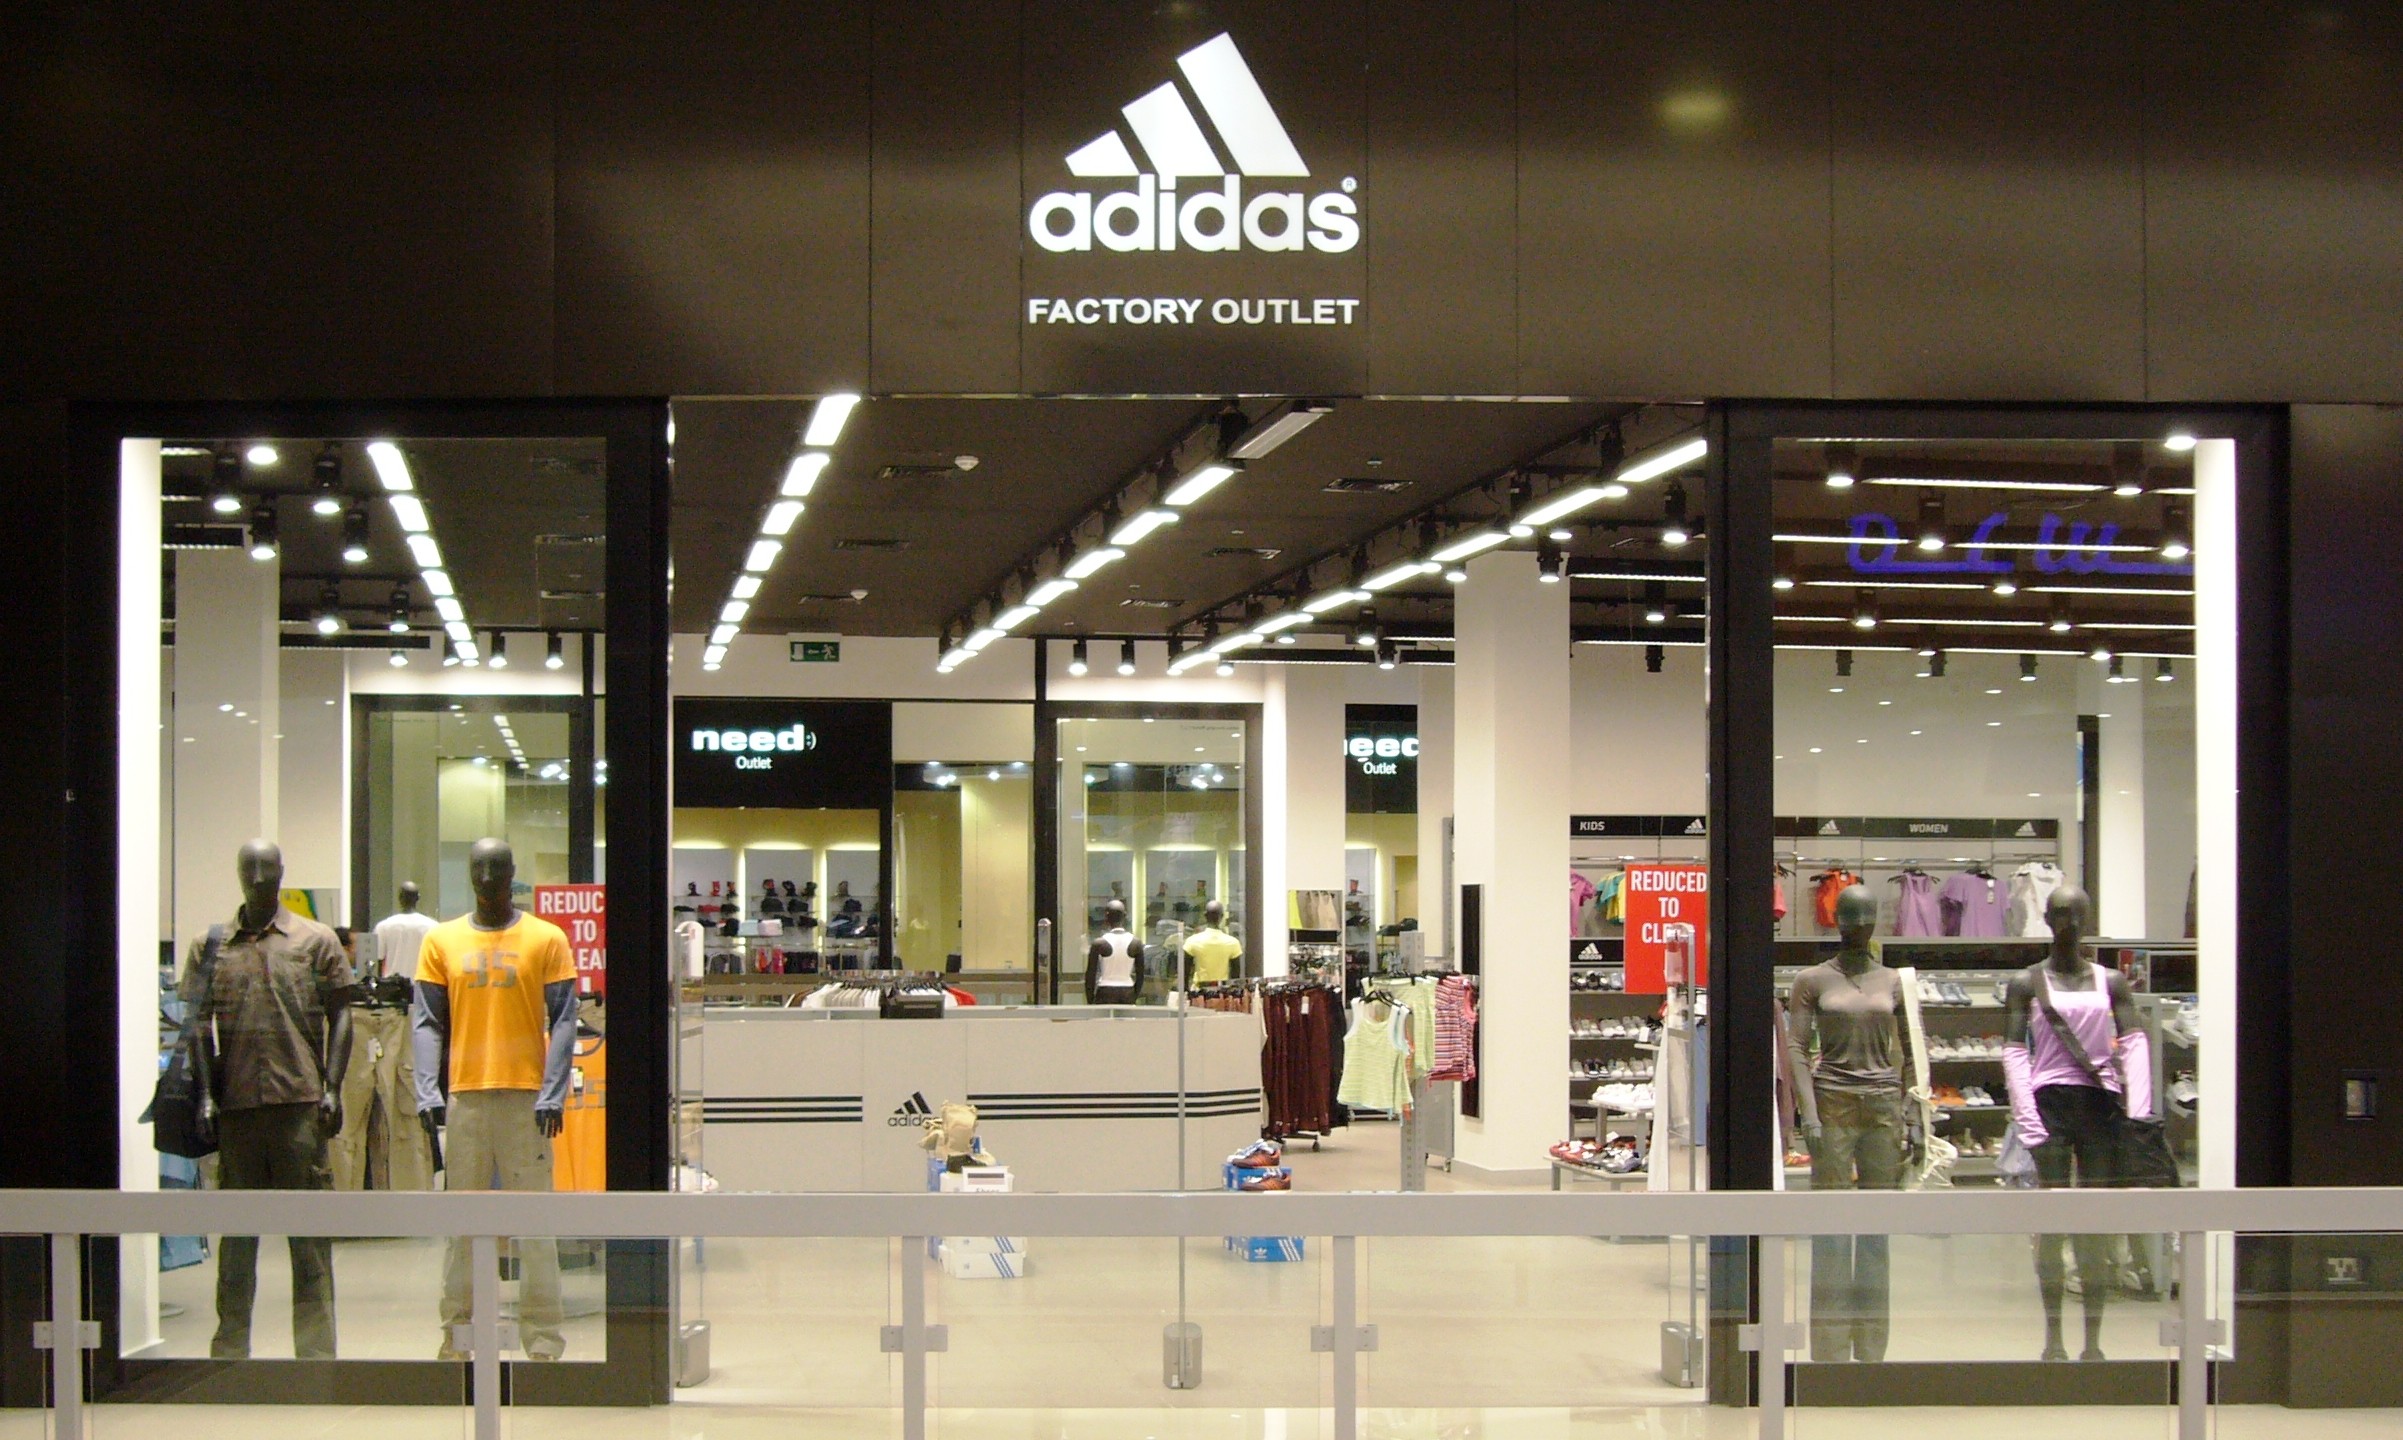 adidas store at outlet mall